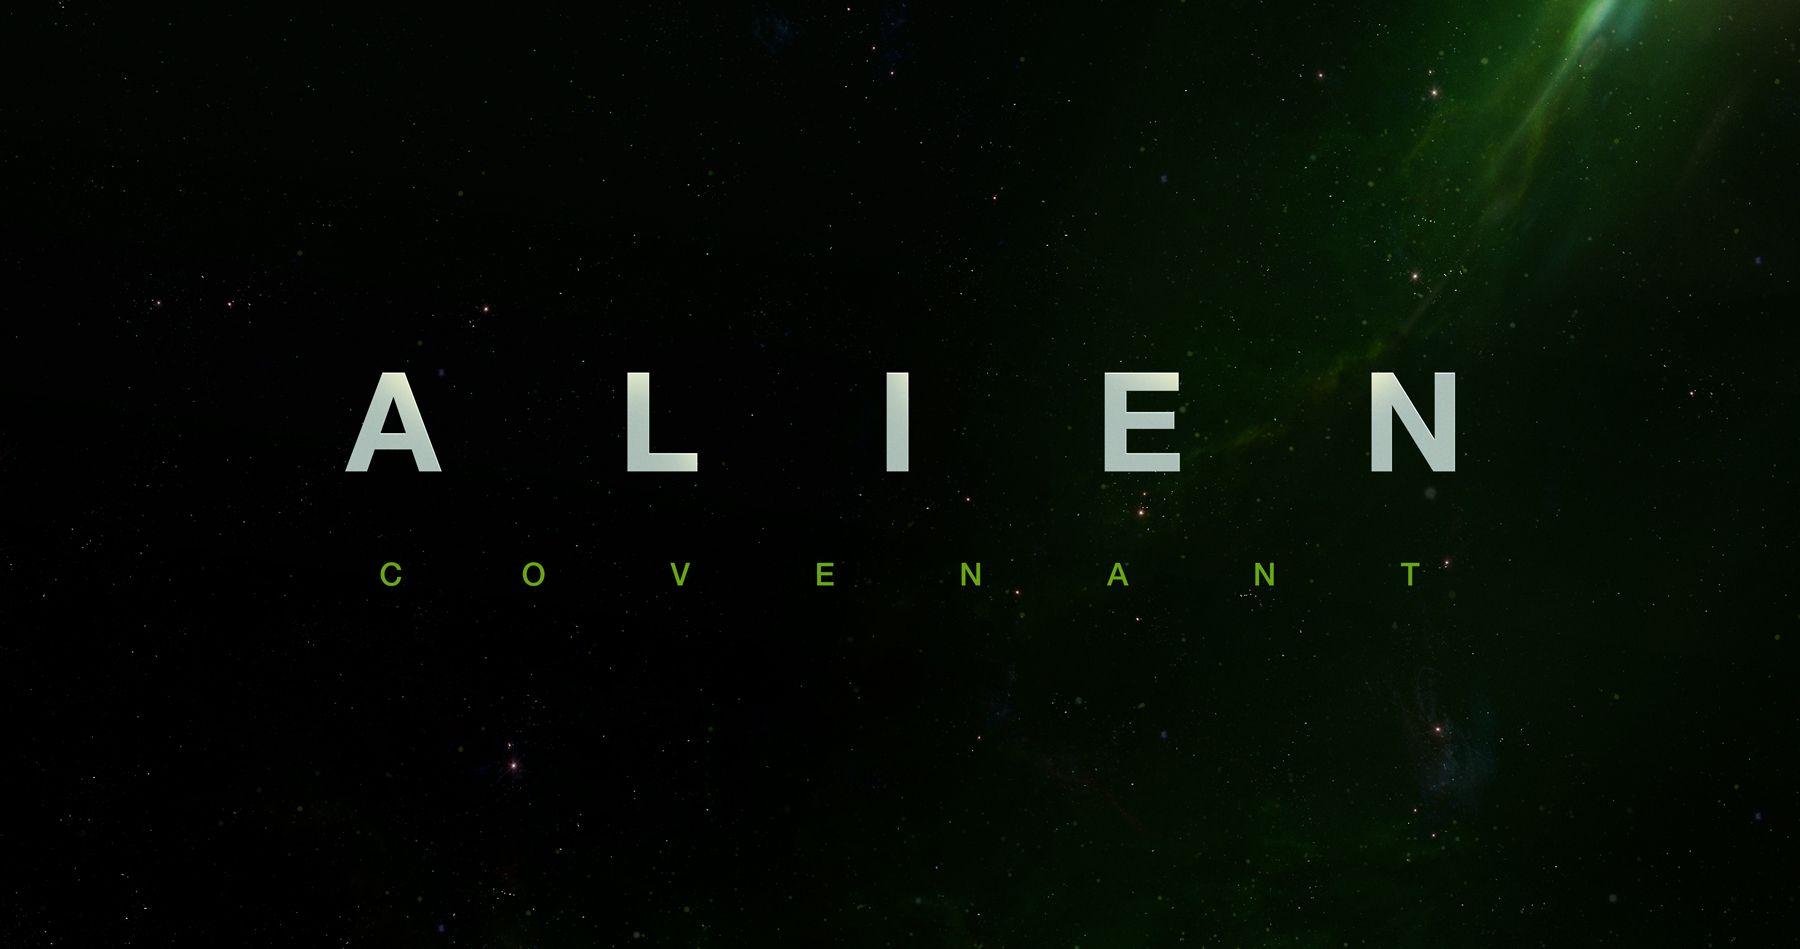 Alien: Covenant 342100 Gallery, Image, Posters, Wallpaper and Stills